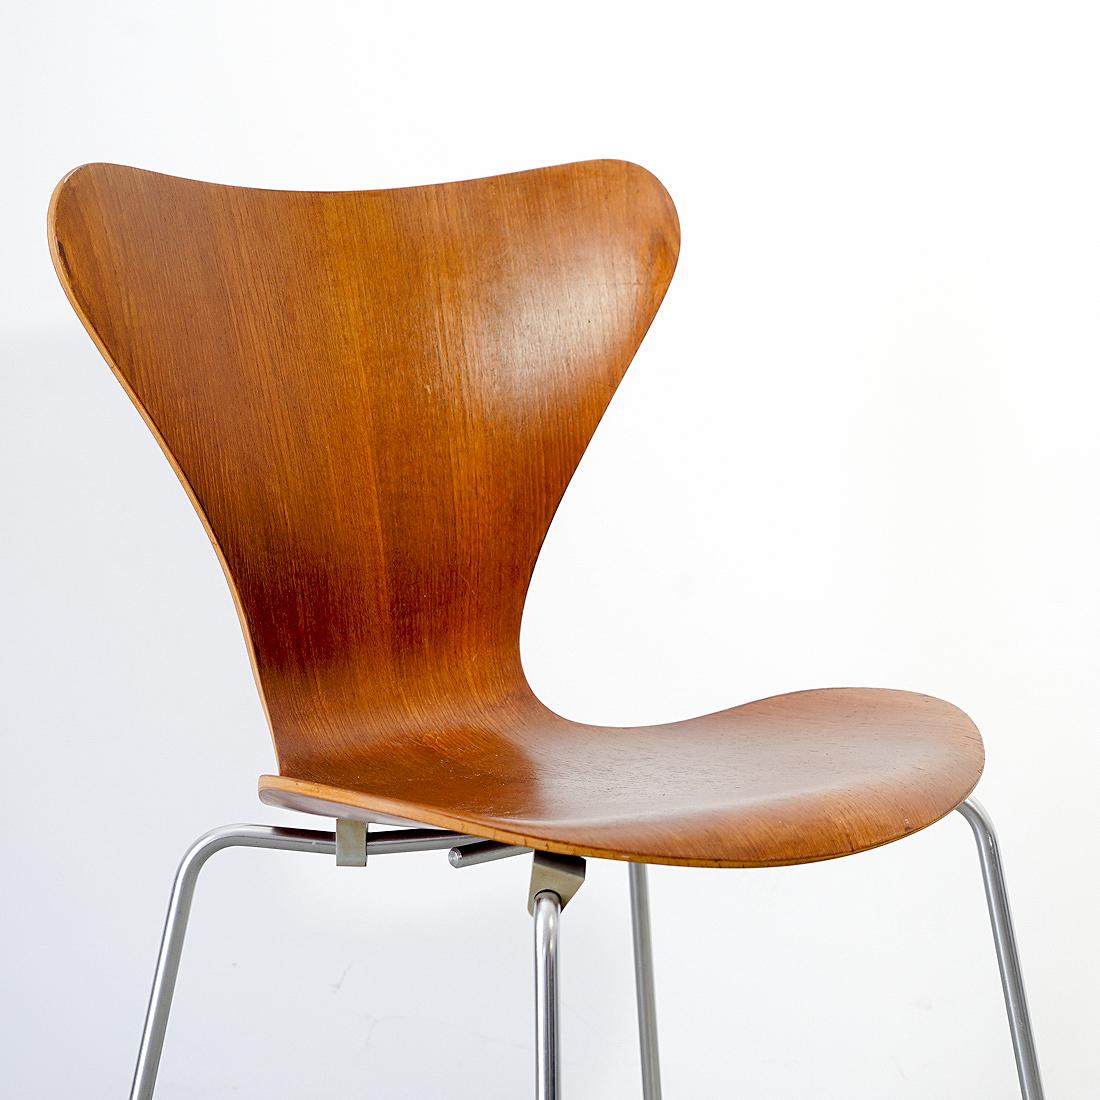 Iconic chair model 3107 from the 7 series designed by Arne Jacobsen and manufactured by Fritz Hansen, Denmark in the 1950s. This series was designed in 1955 and debuted in Sweden at the Helsingborg exhibition. It is comprised of teak plywood which